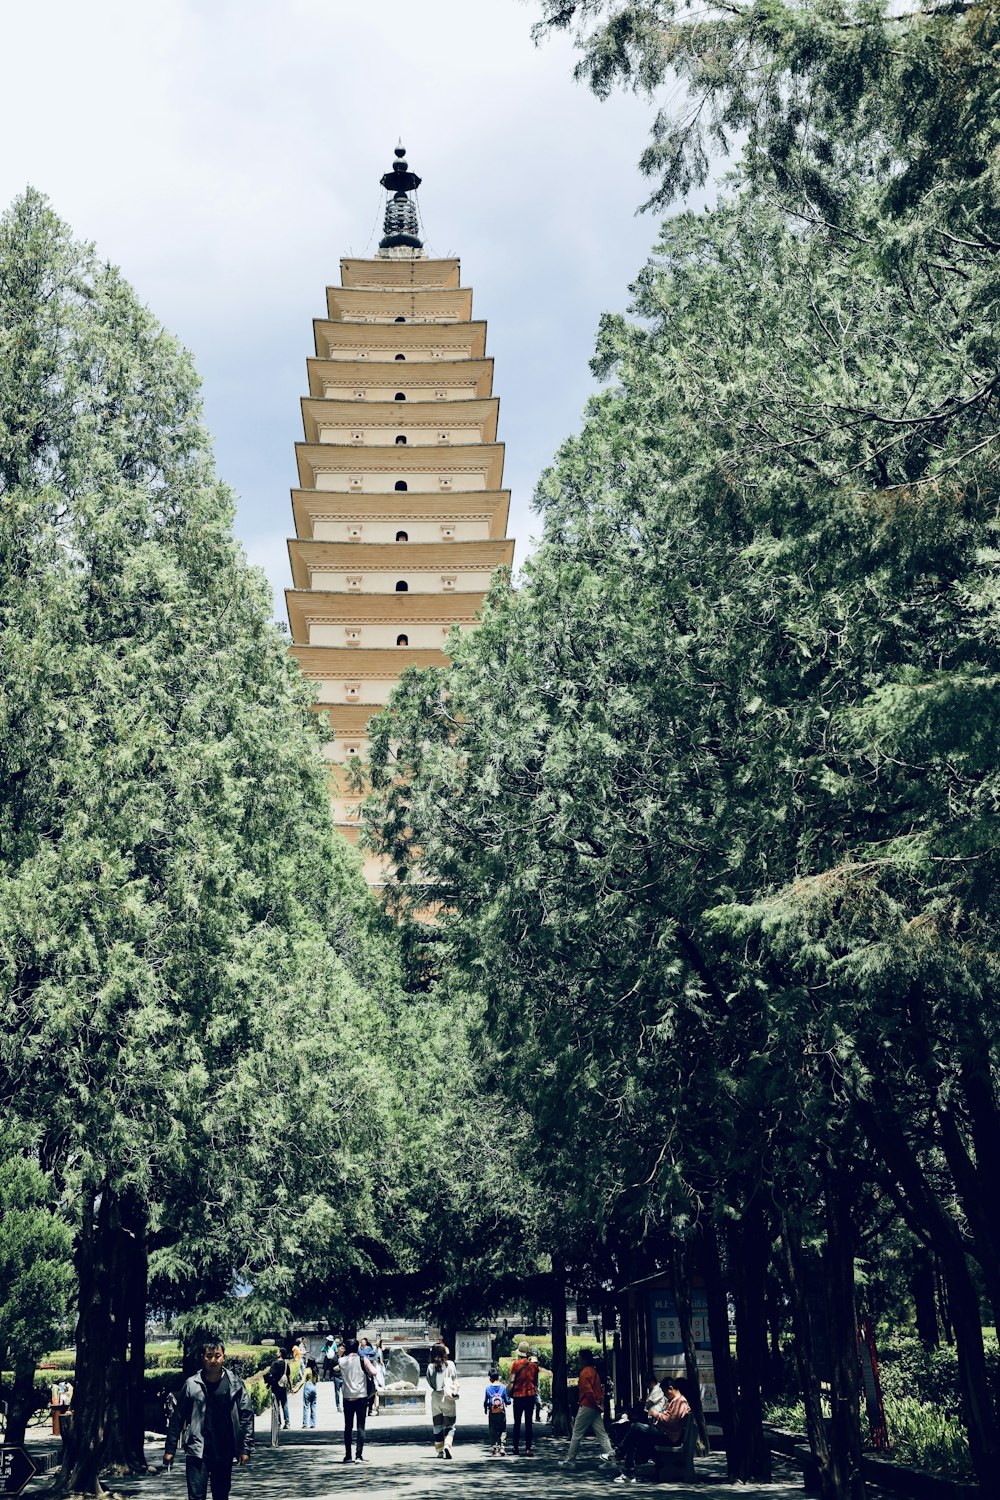 a tall tower towering over a forest filled with trees